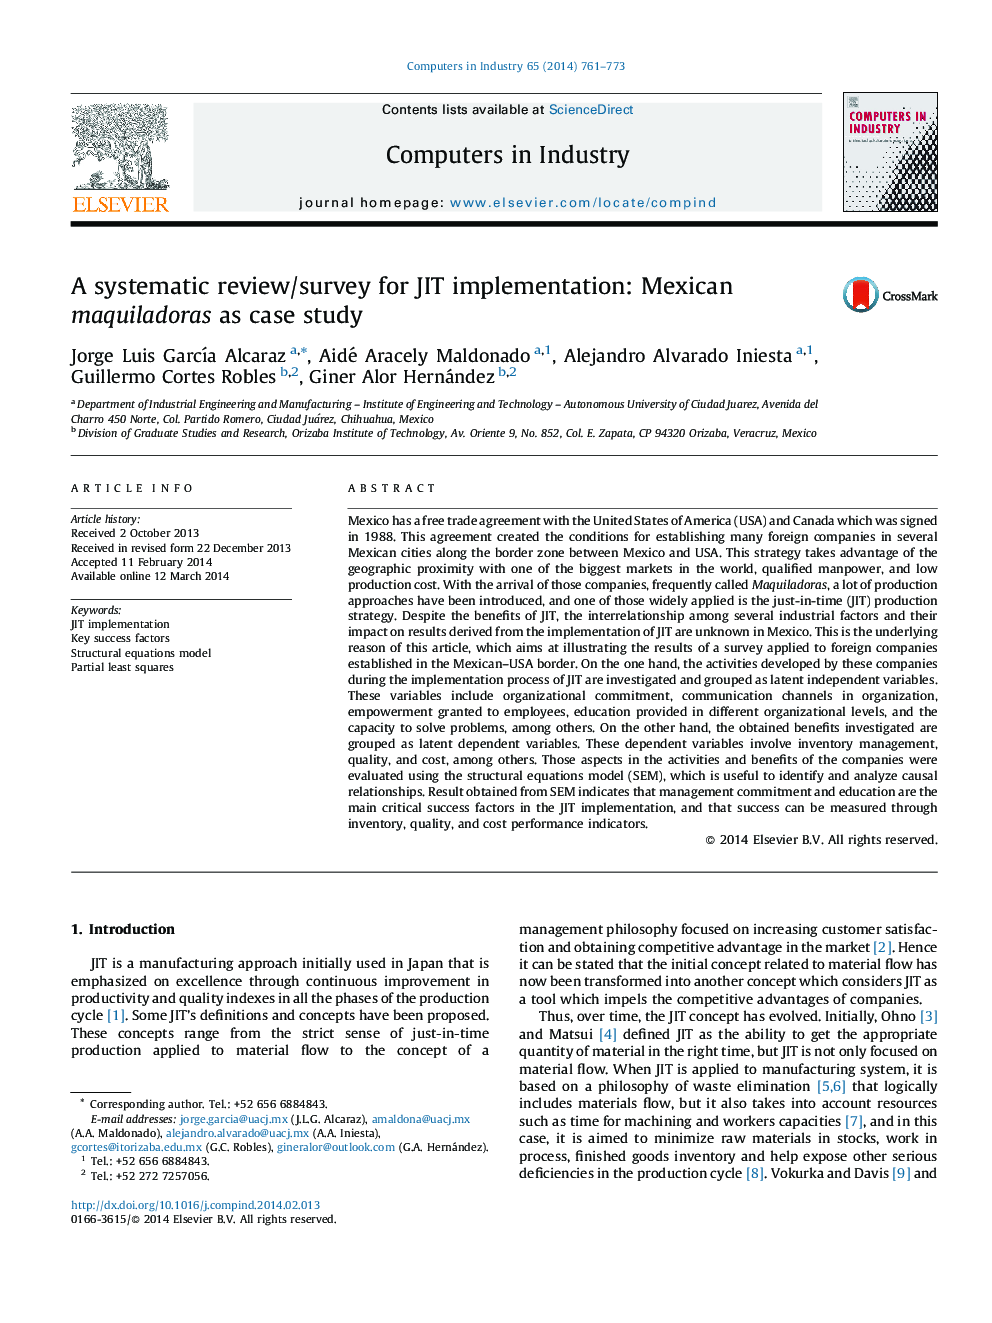 A systematic review/survey for JIT implementation: Mexican maquiladoras as case study